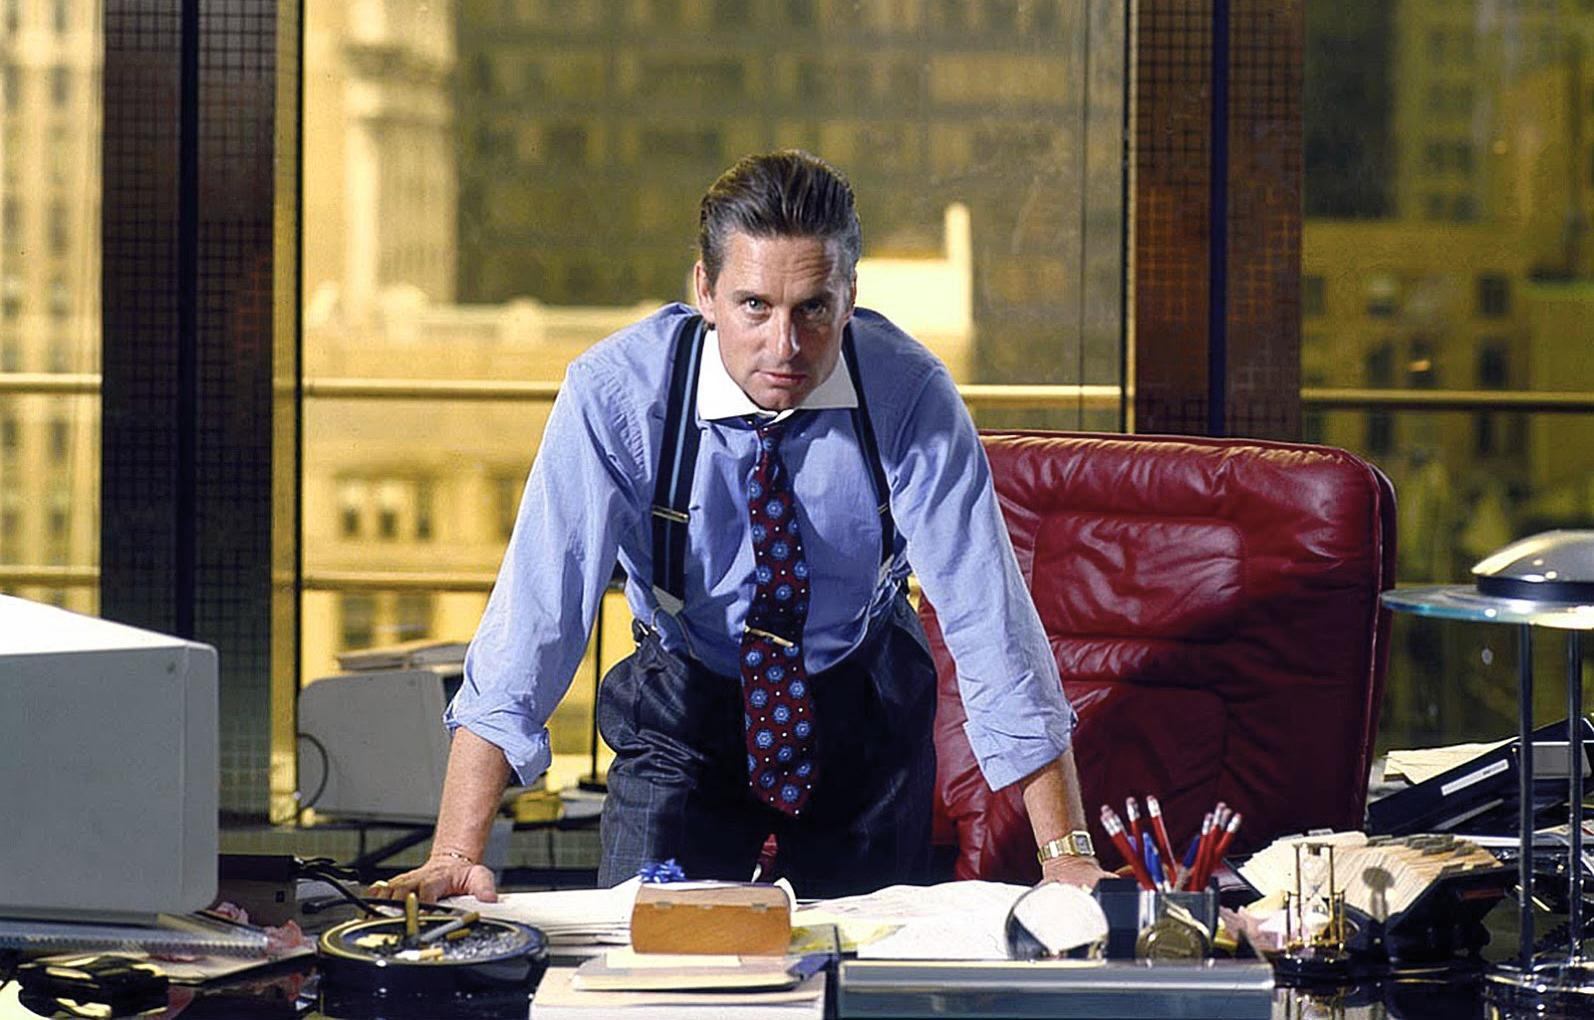 Image Gallery For Wall Street Filmaffinity